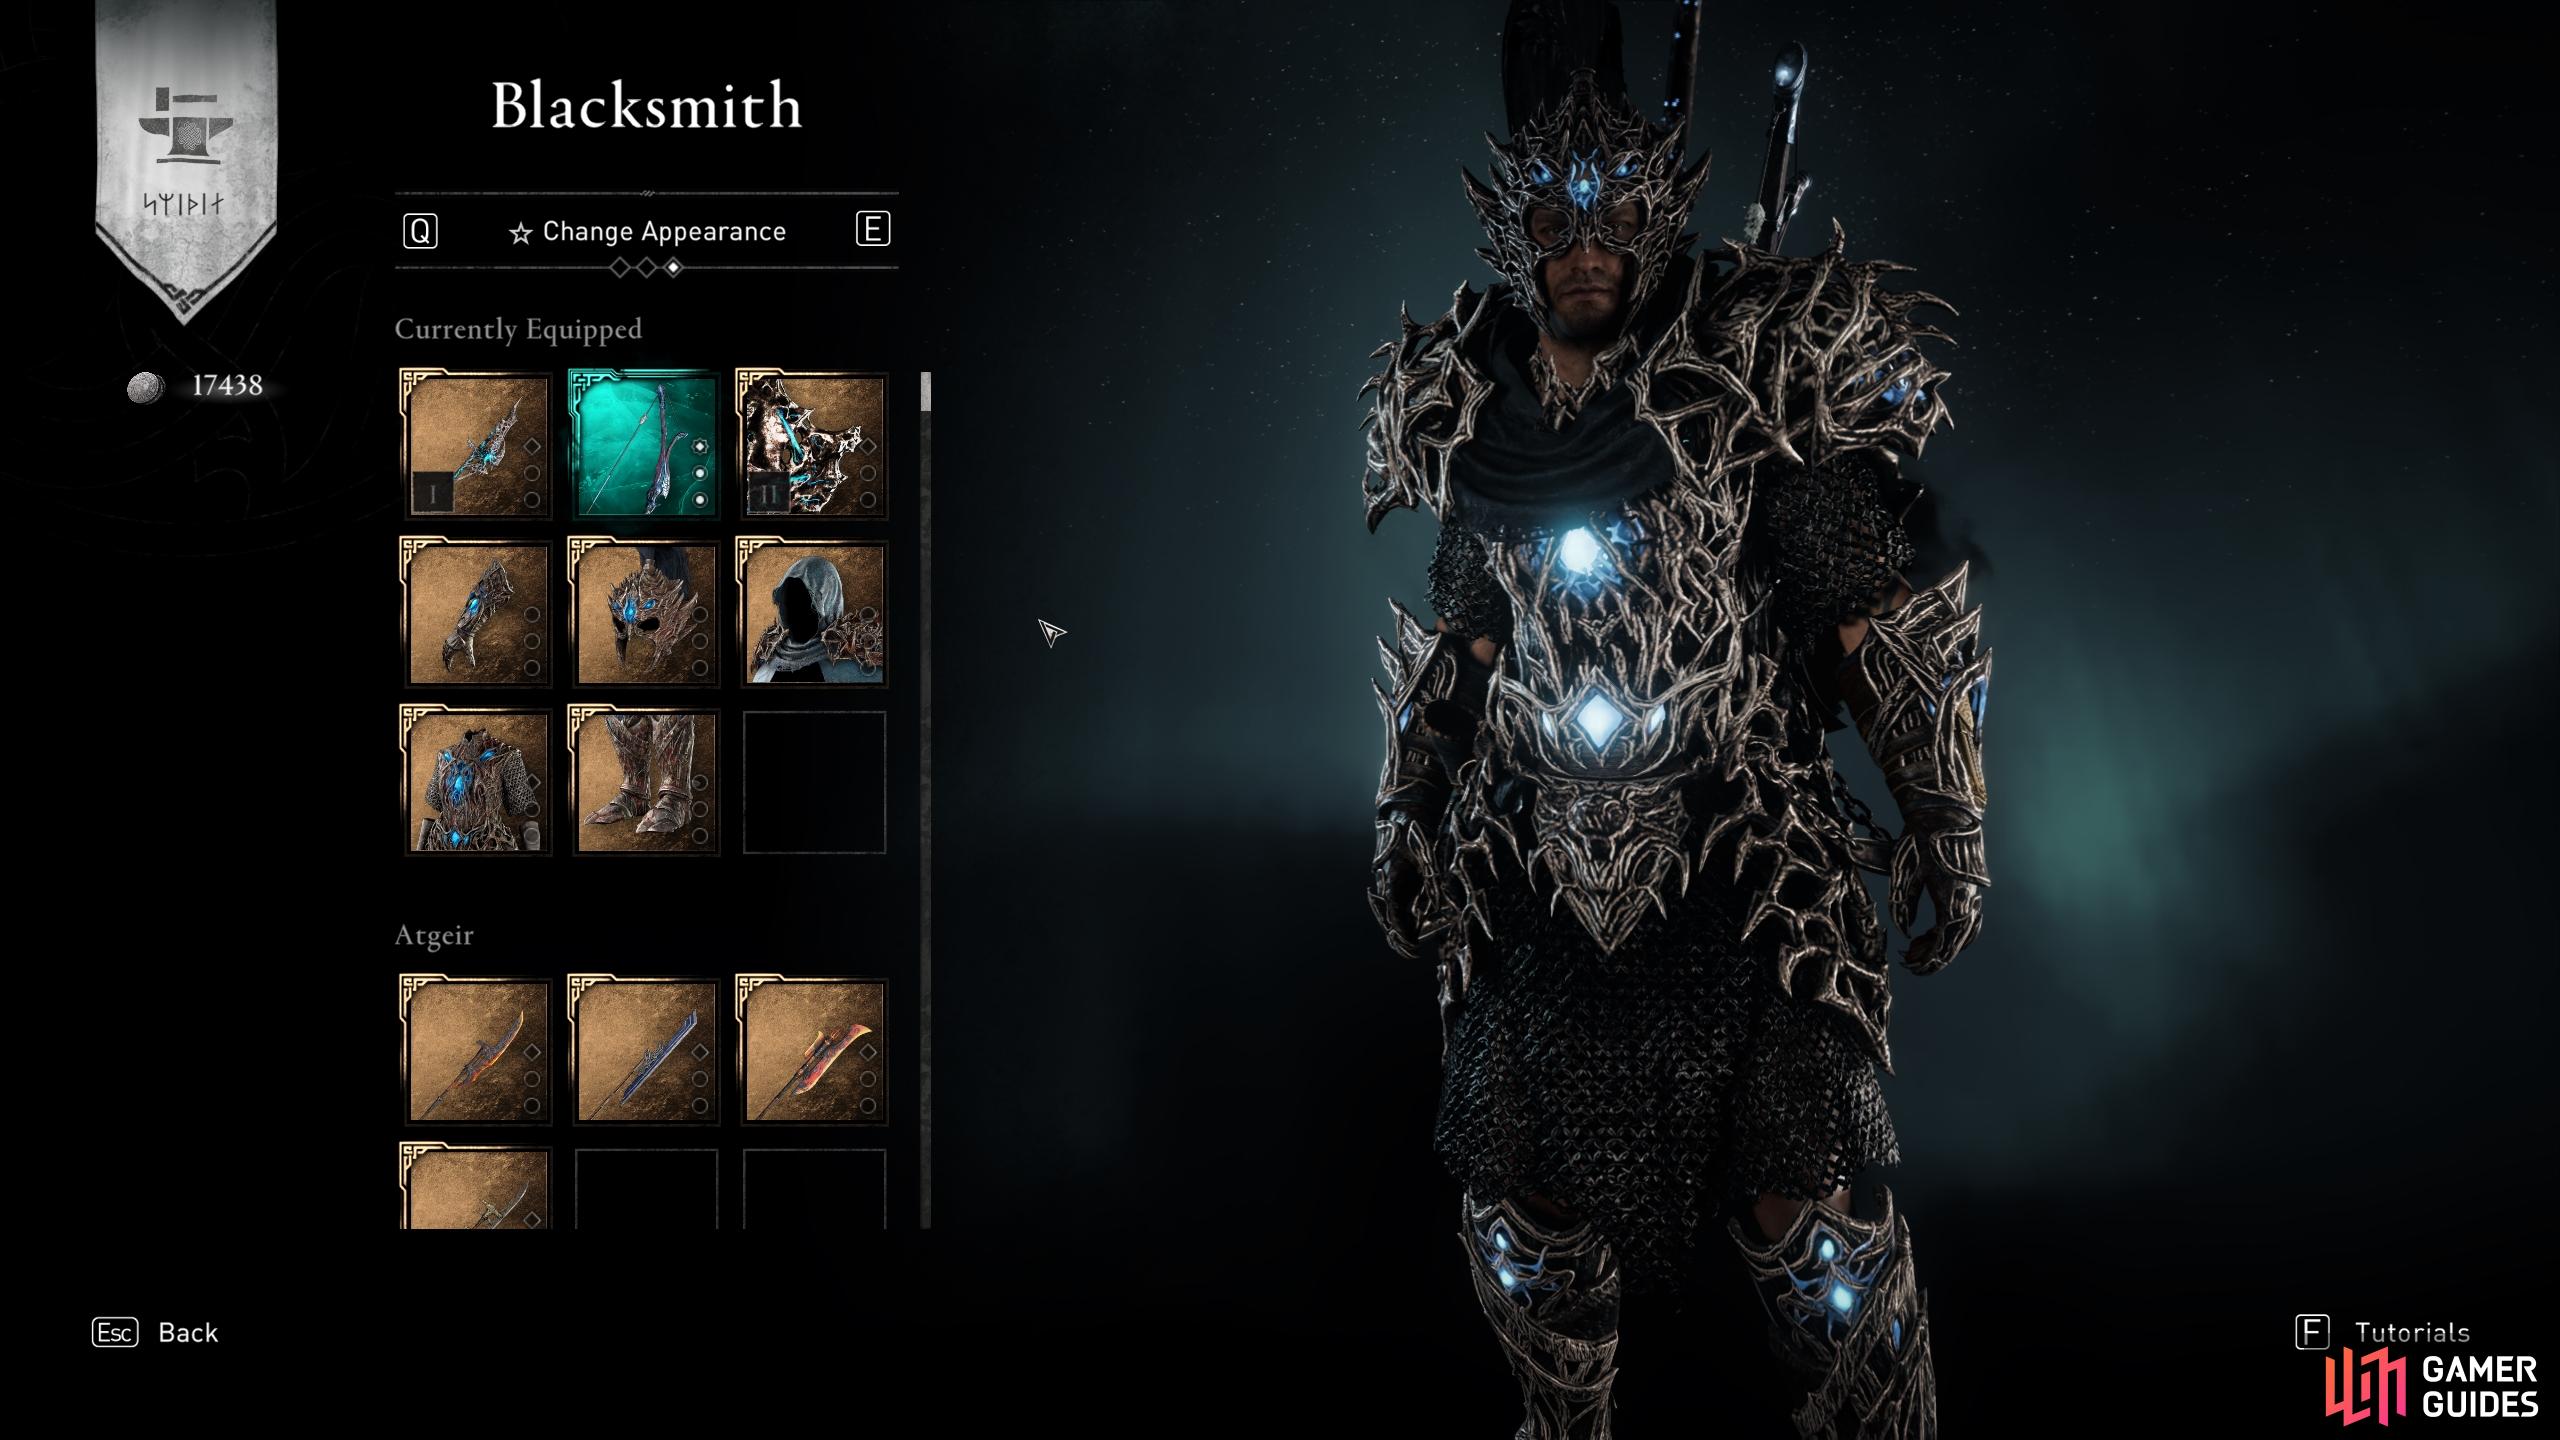 You can change the appearance of the Death Jarl set to any other set that you own by speaking with a Blacksmith, such as Gunnar in Ravensthorpe.